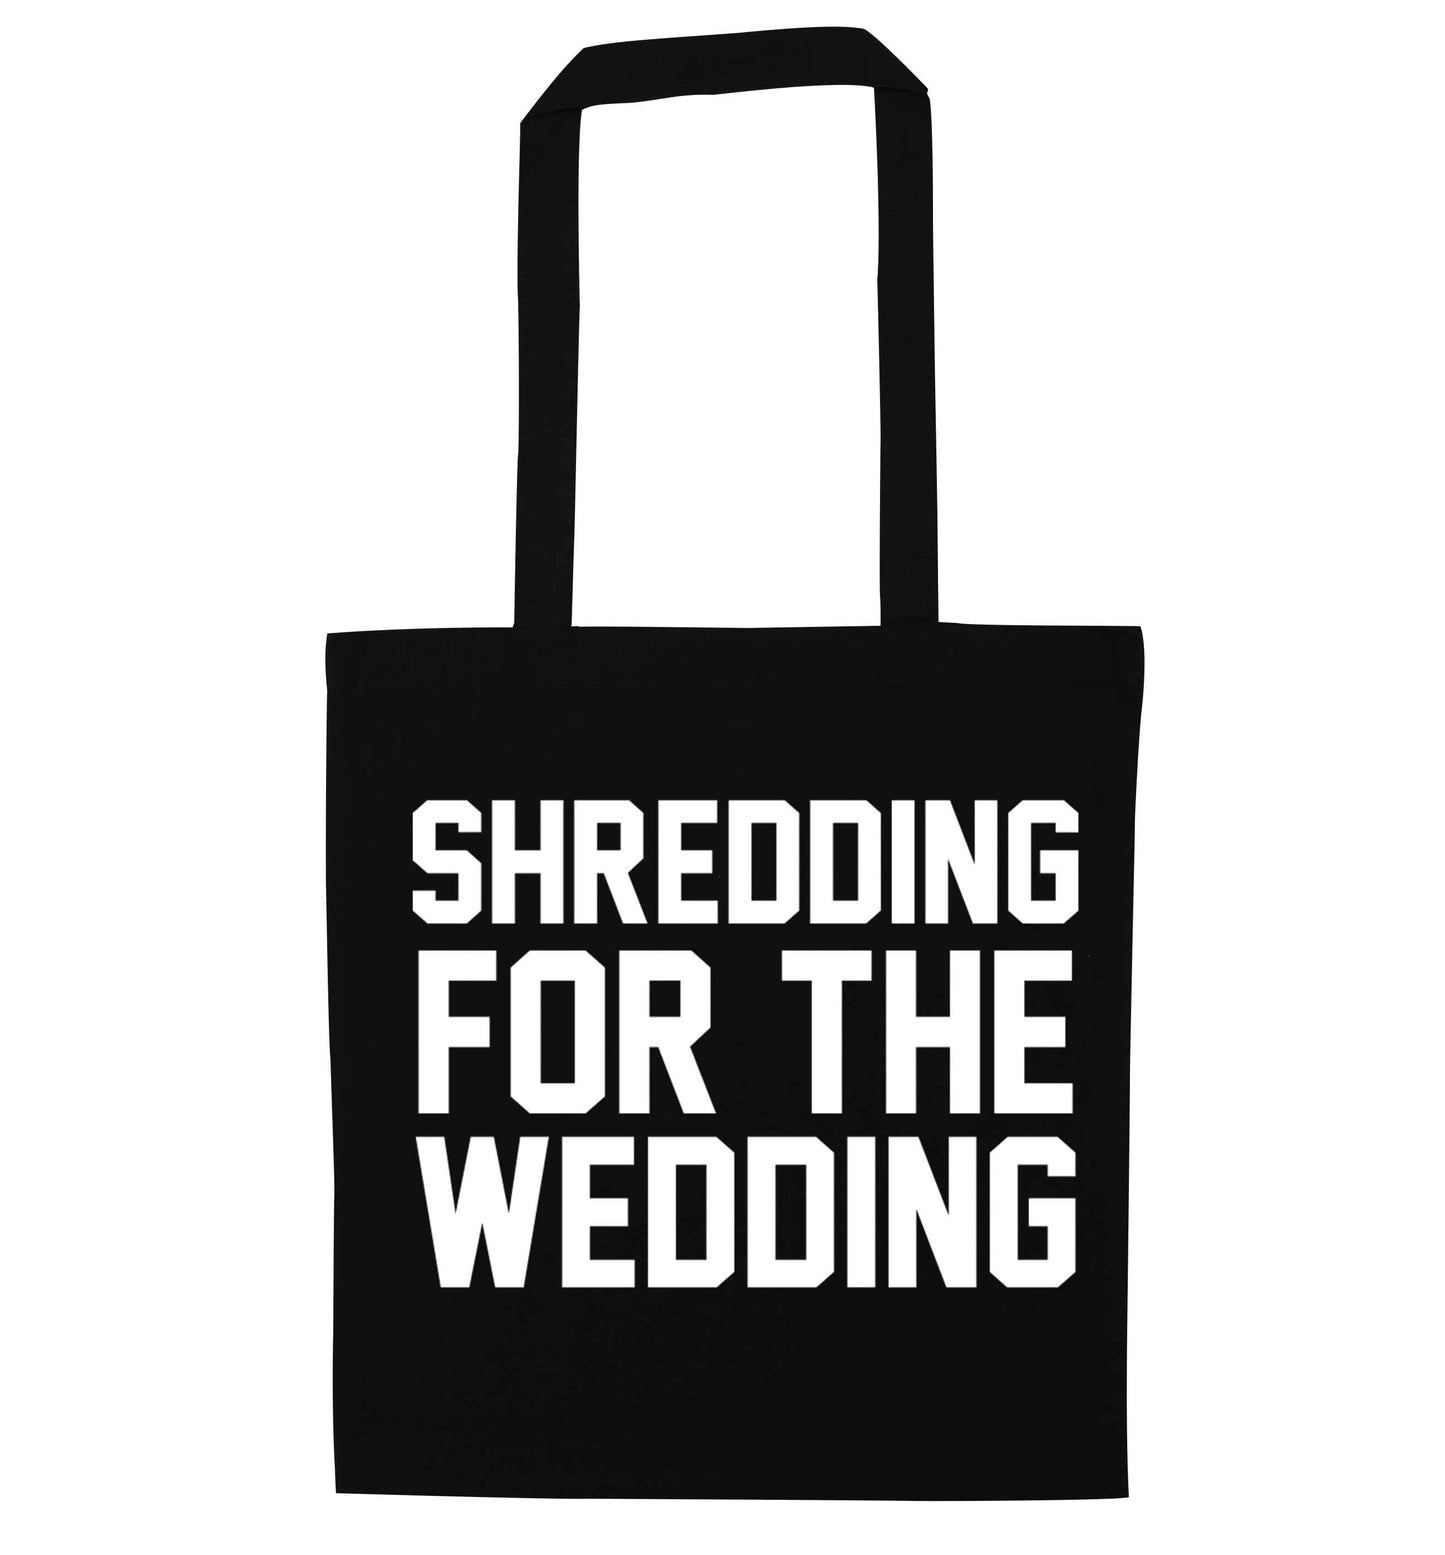 Get motivated and get fit for your big day! Our workout quotes and designs will get you ready to sweat! Perfect for any bride, groom or bridesmaid to be!  black tote bag